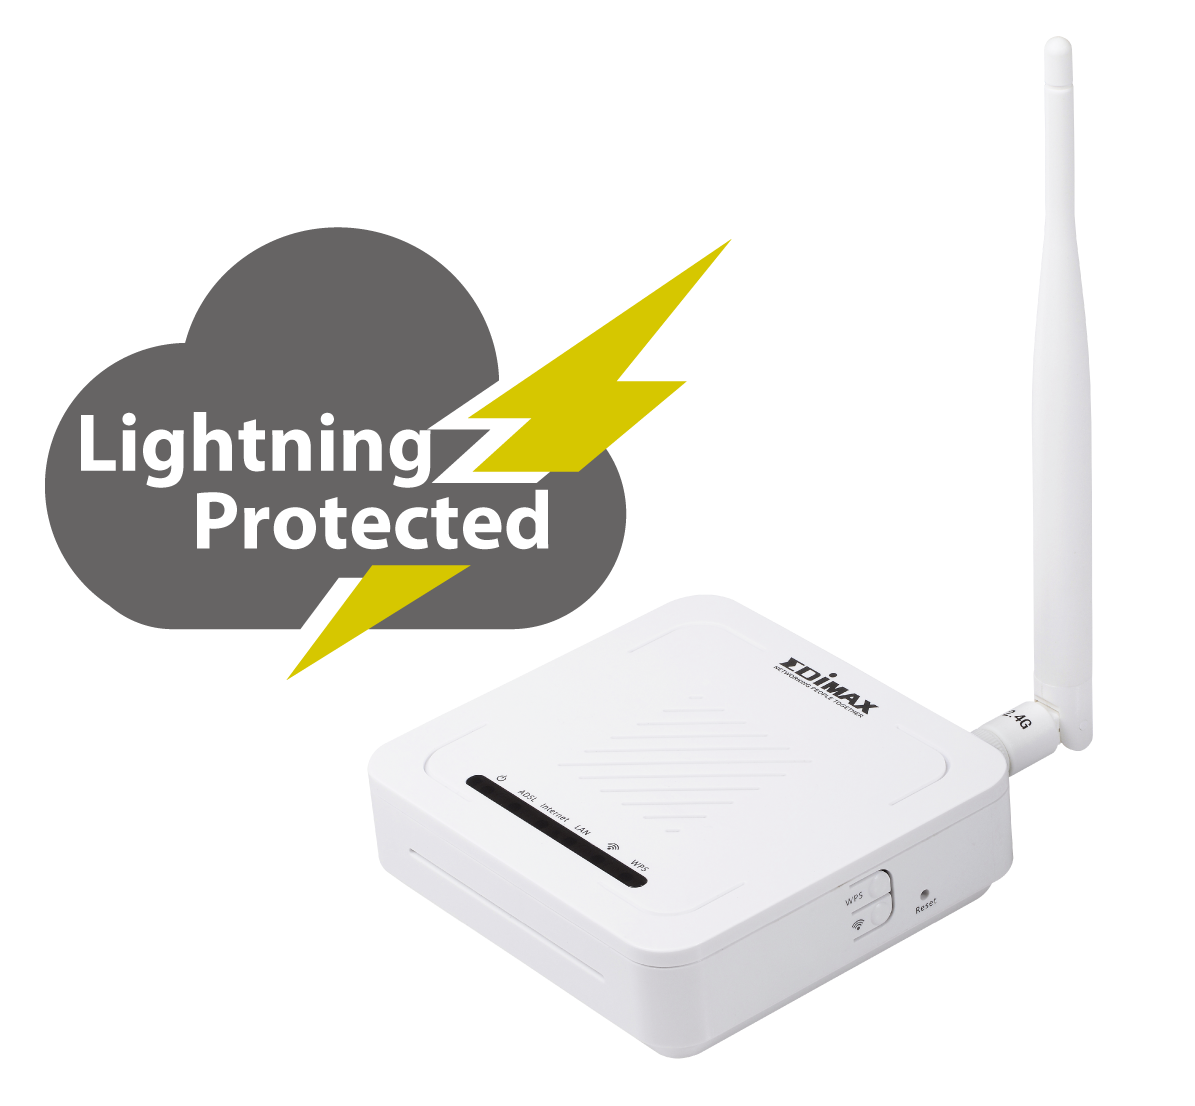 Edimax N150 Wireless ADSL Modem Router AR-7182WnAB_lightning_protected.png